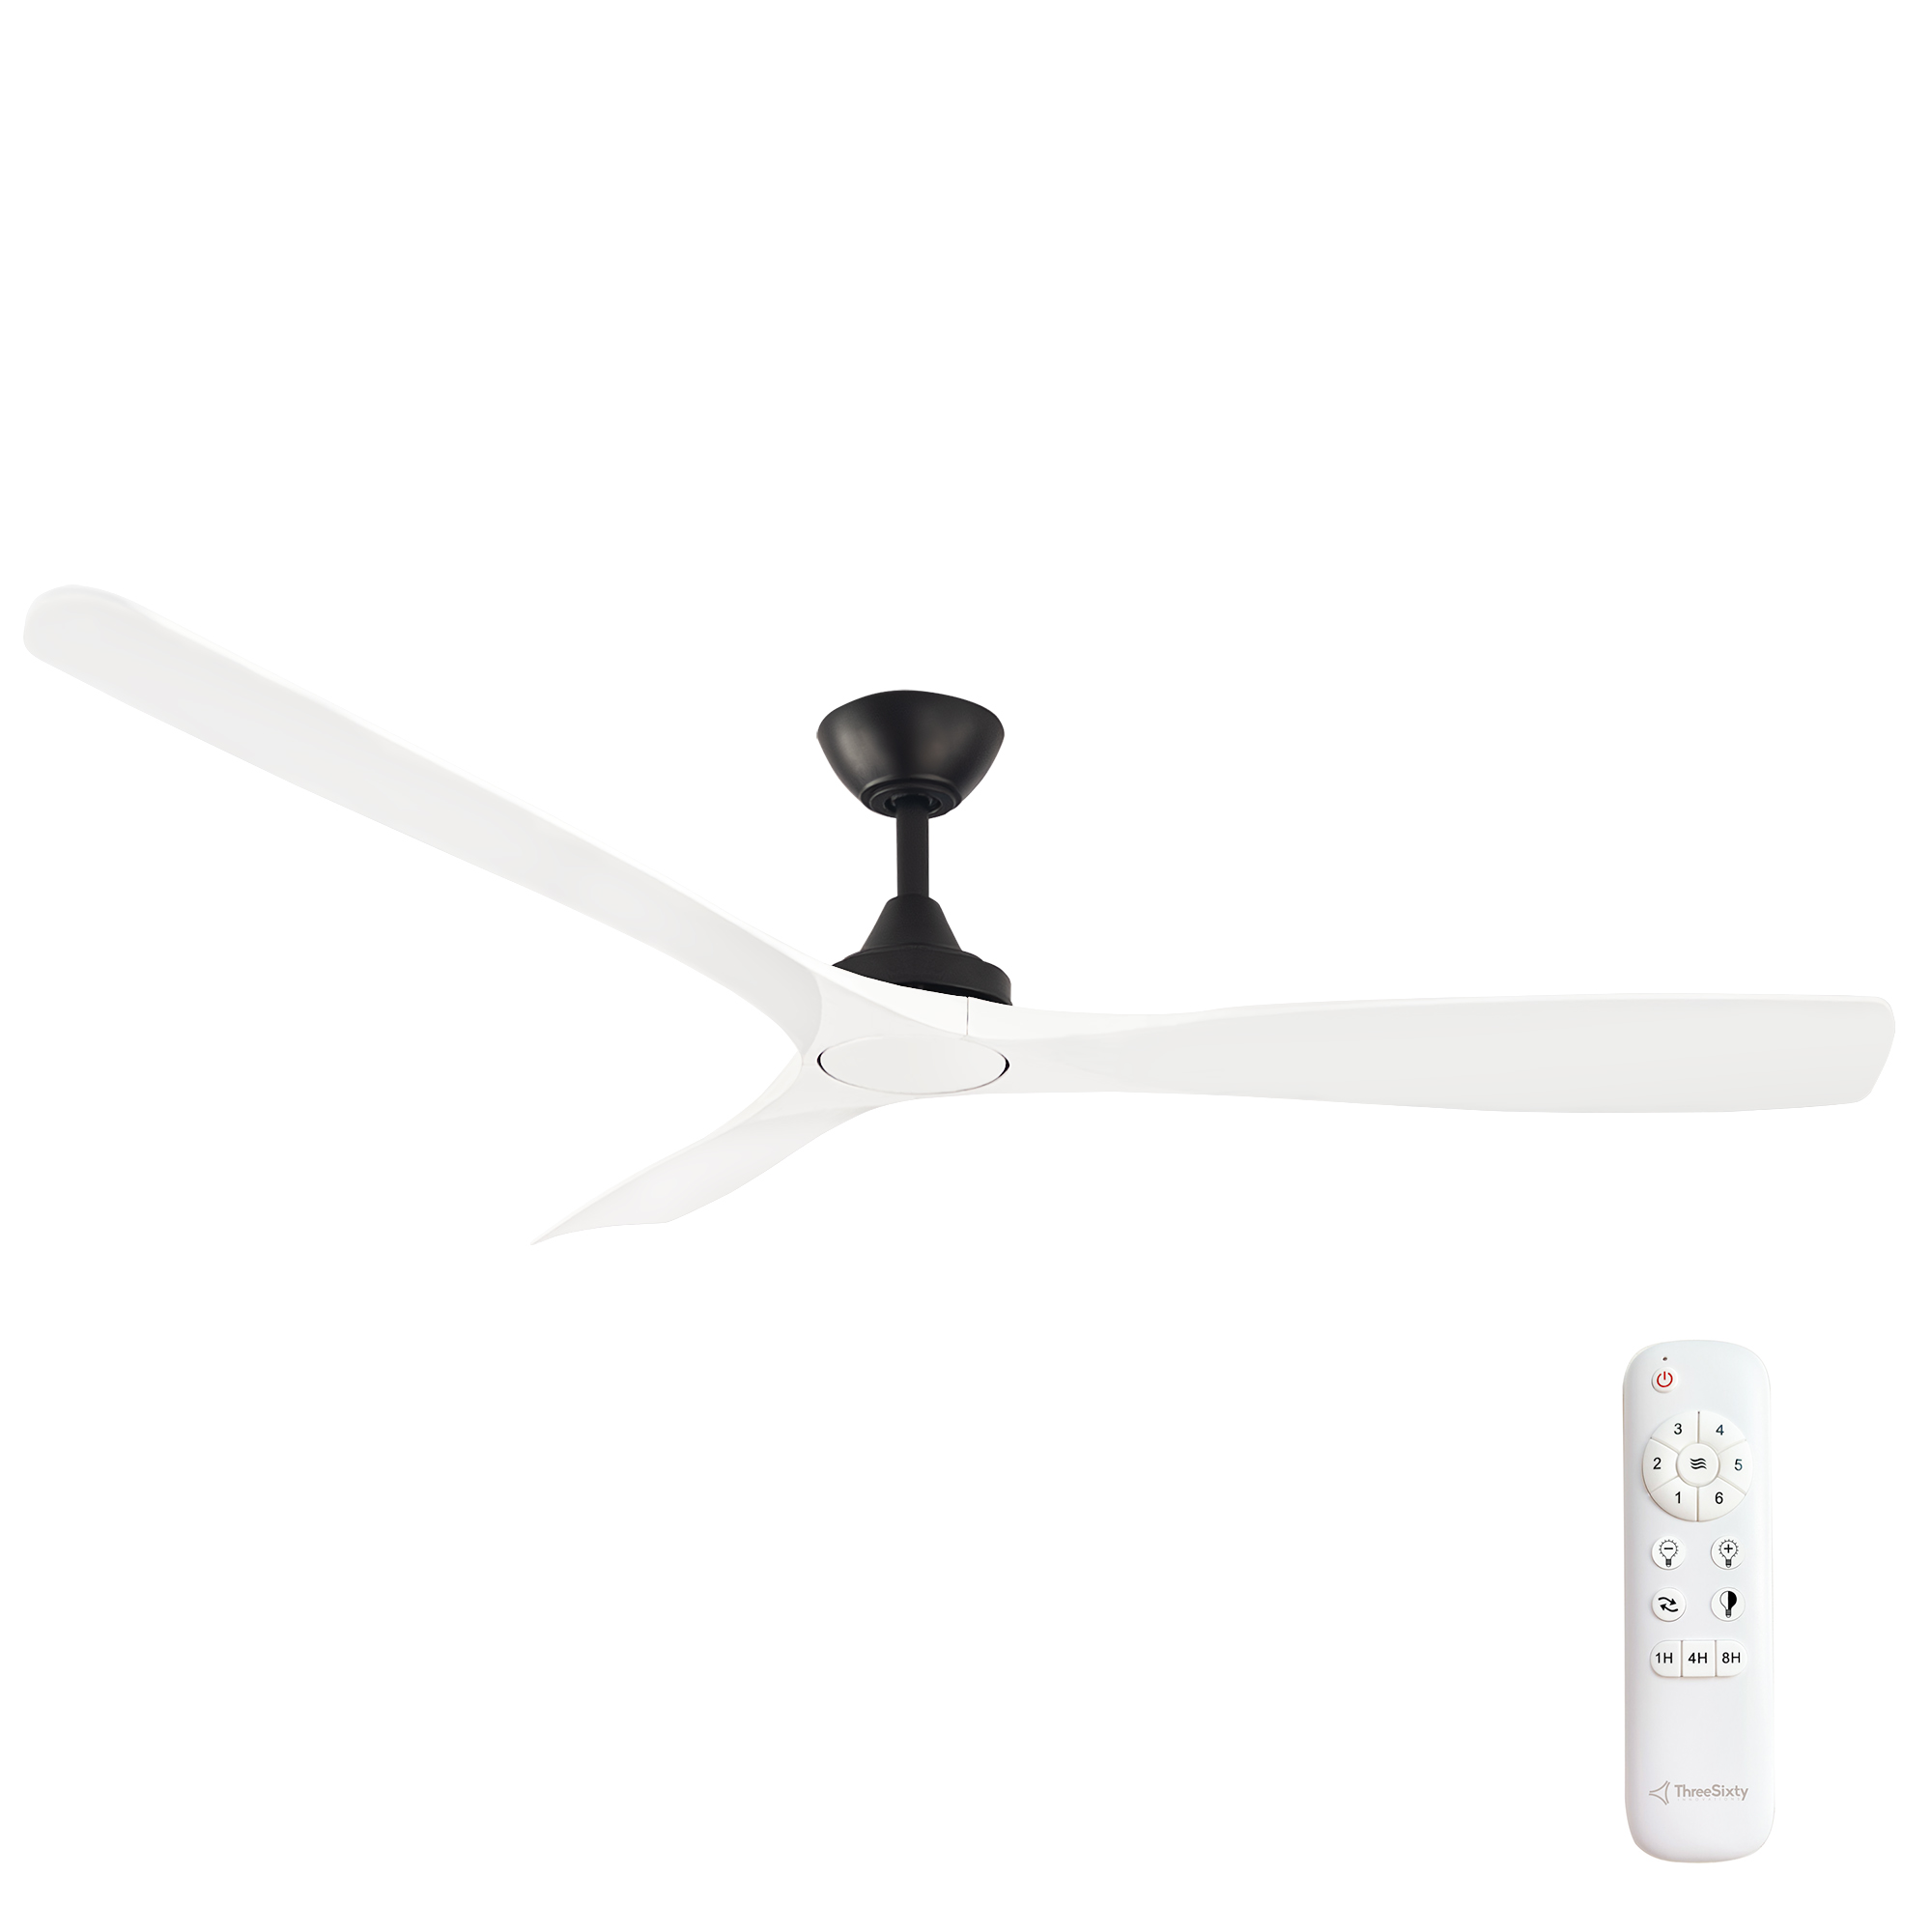 60" Spitfire DC Ceiling Fan in Black with White blades